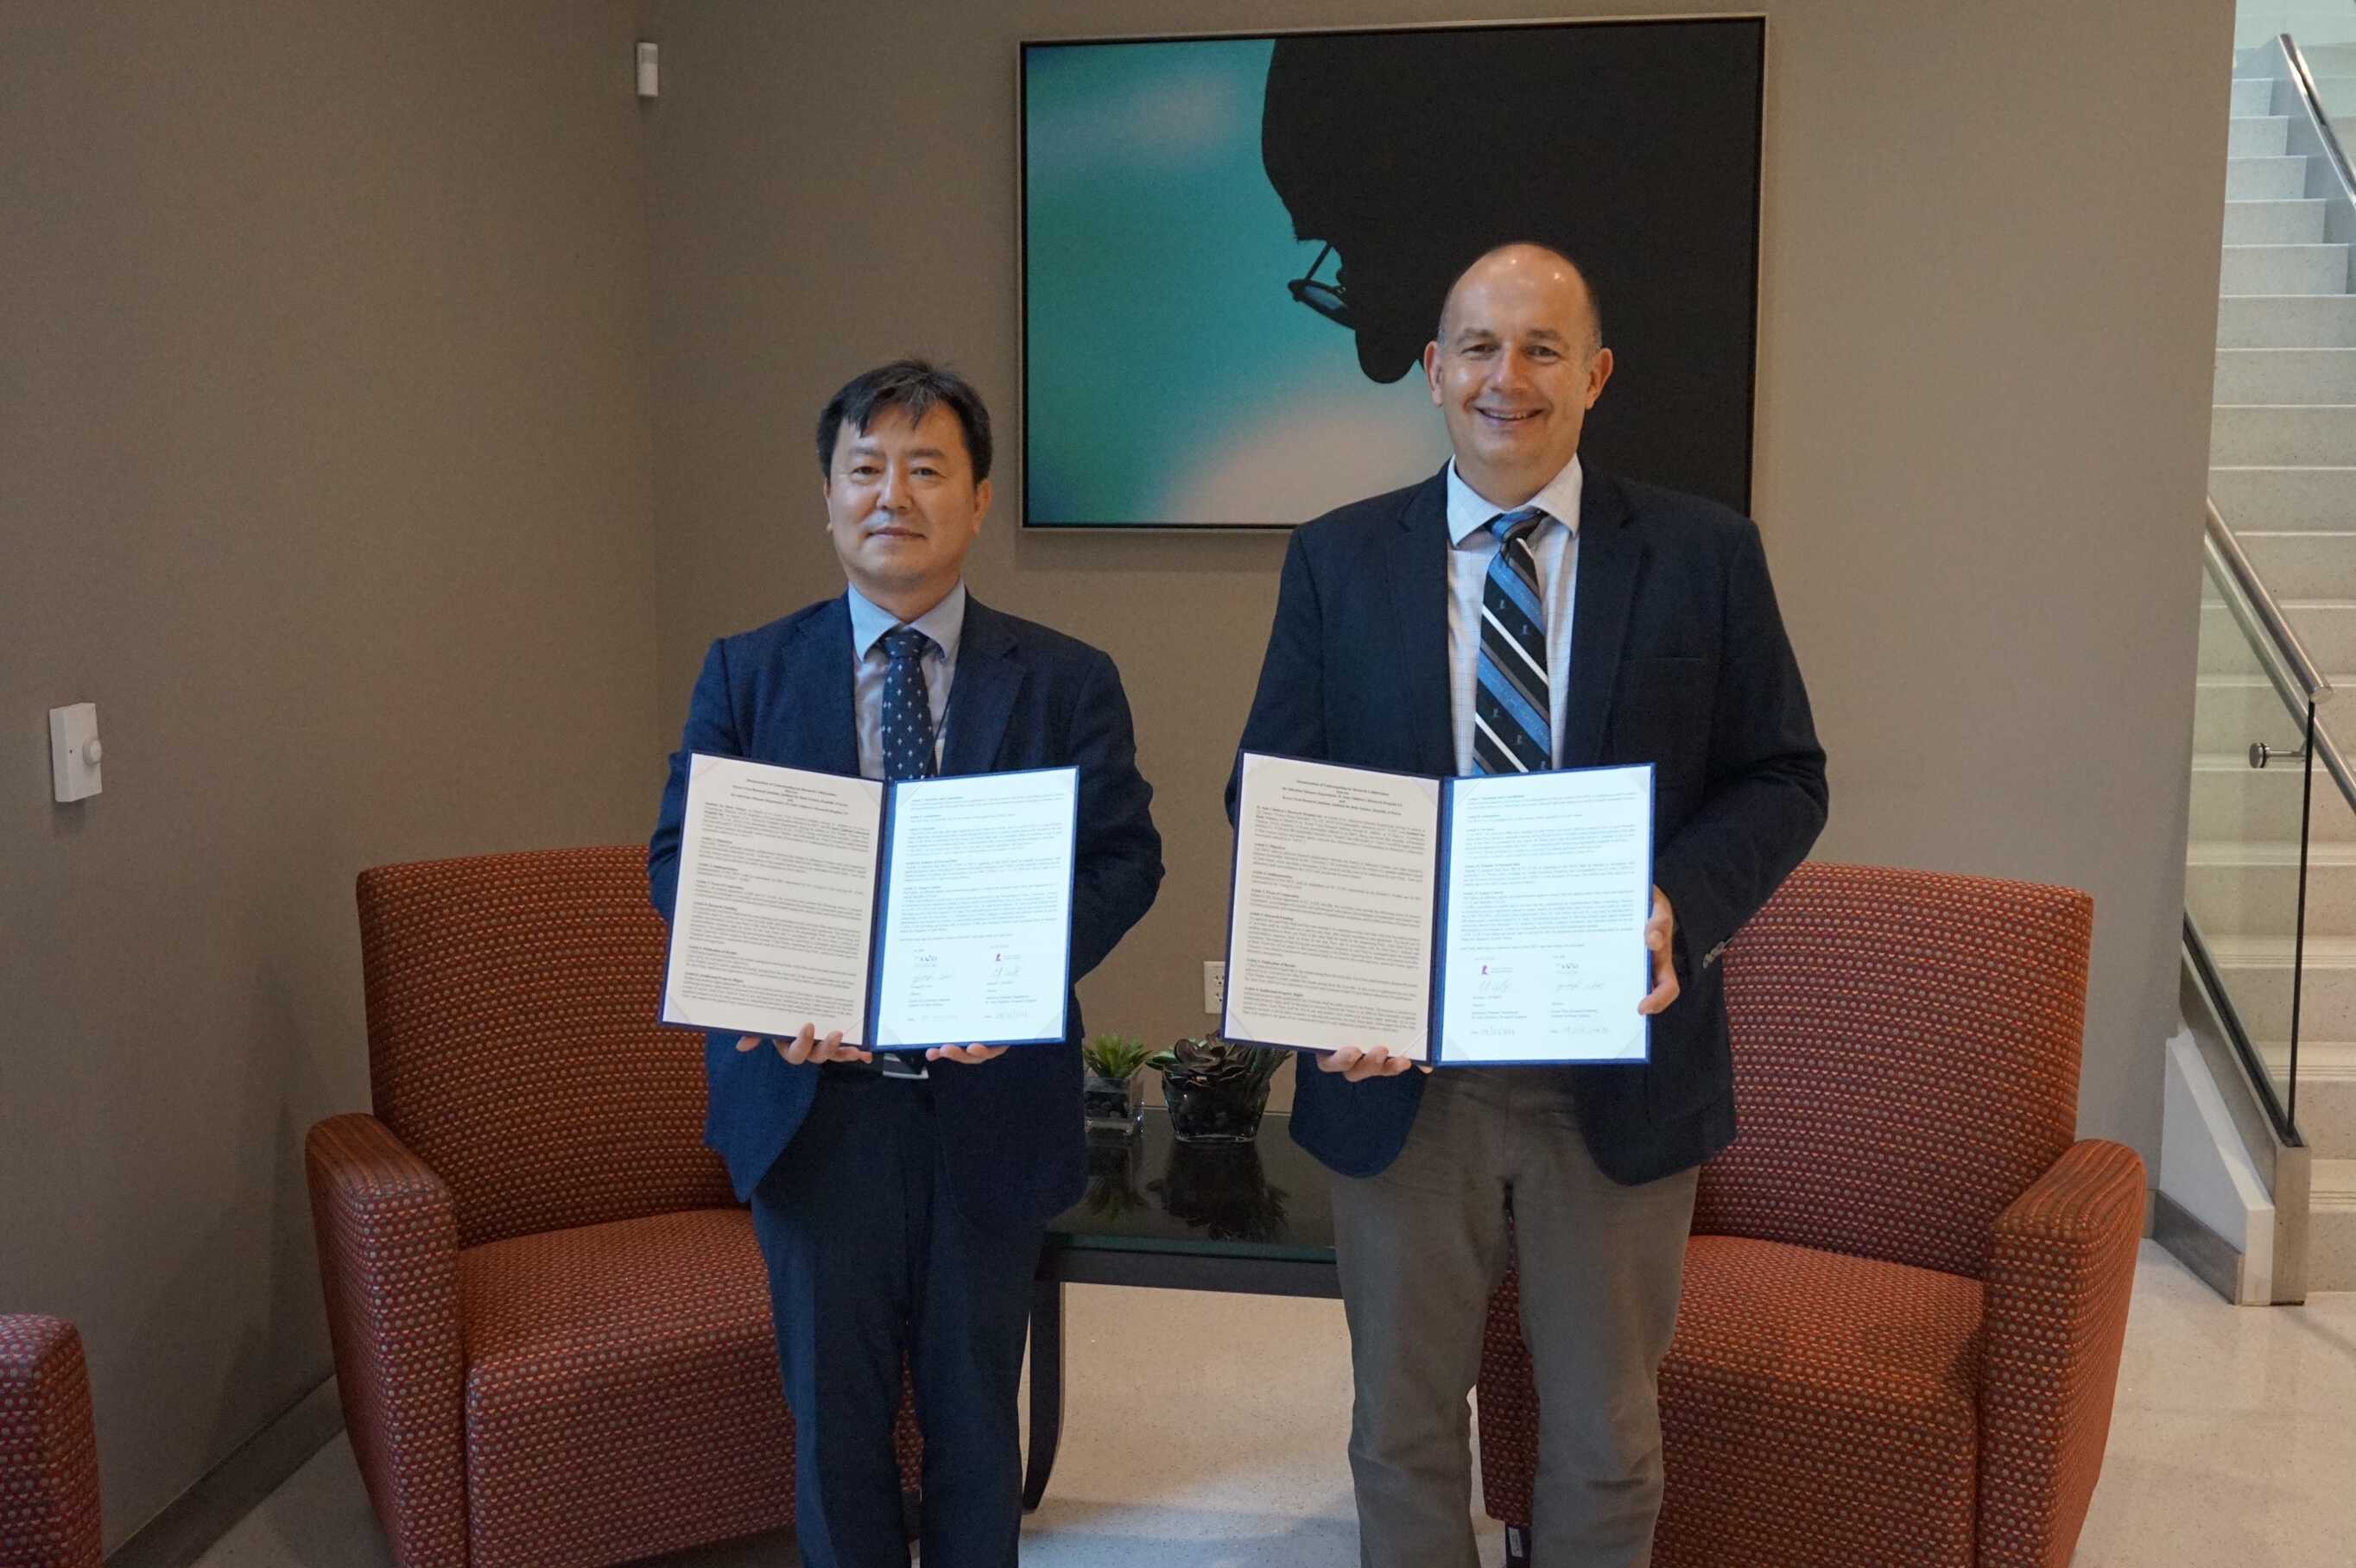 [Picture 2] On August 23rd (local time), the IBS KVRI signed an MOU agreement with St. Jude Children's Research Hospital in the U.S. for joint research on viral infectious diseases. From left, Managing Director CHOI Young Ki of the IBS KVRI and Director Richard Webby of the WHO Animal and Avian Influenza Ecology Research Center in St. Jude Children's Research Hospital.